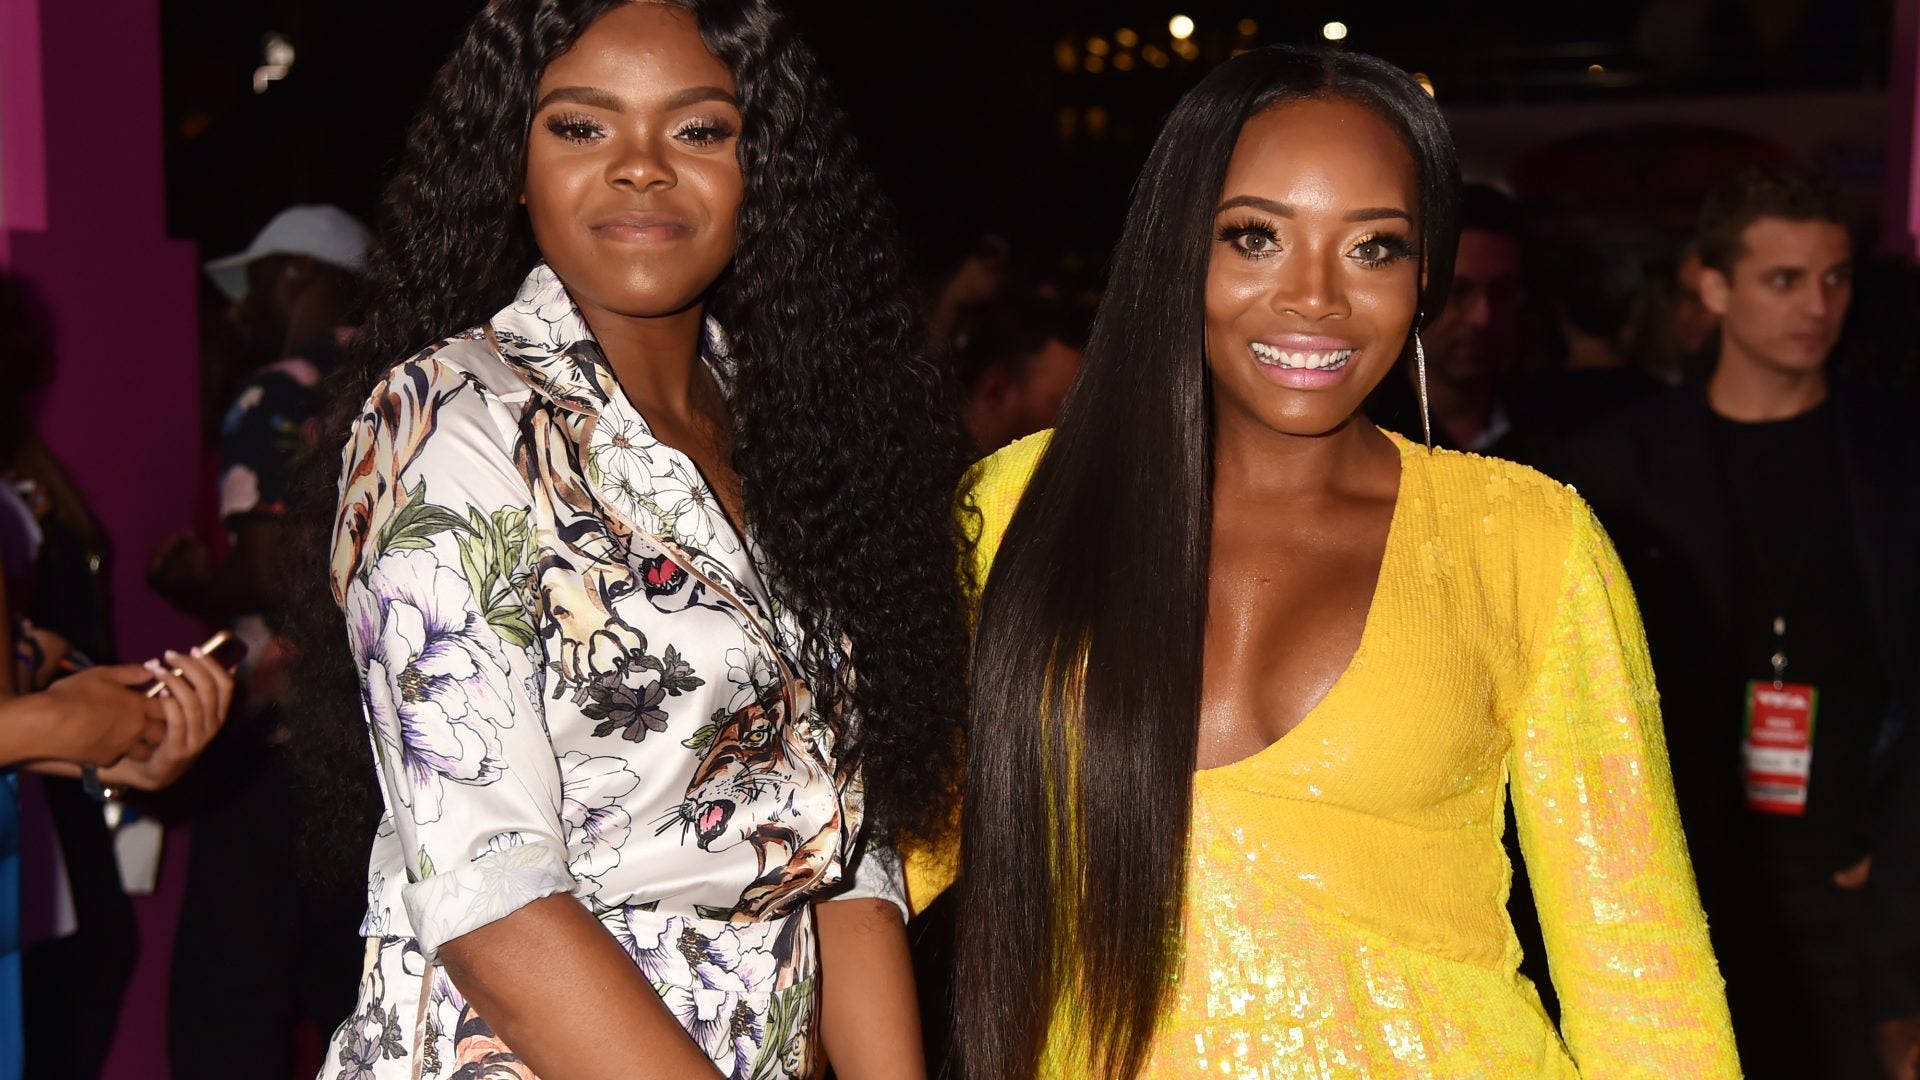 Yandy Smith Speaks On State Of Relationship With Adopted Daughter Infinity: "She's Forever Welcome In My Family"